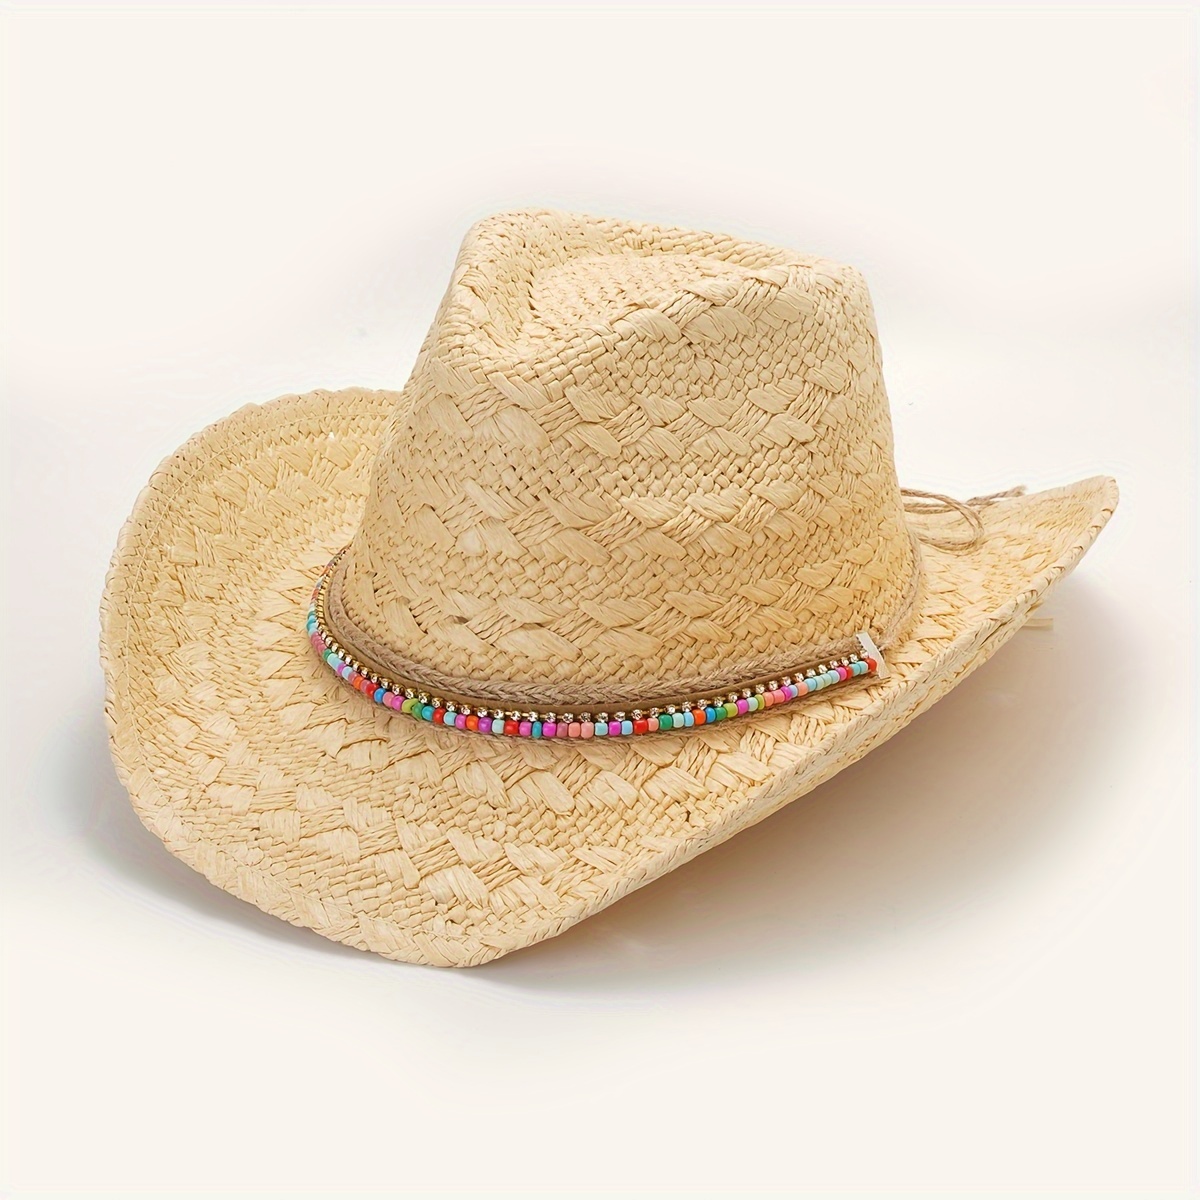 Western Cowboy Hat With Wide Brim, Alloy Feather Beads, And Panama Drop  Design Perfect For Summer Beach Boho Style Accessories For Women And Men  DH0Ij From New_dhbest, $6.03